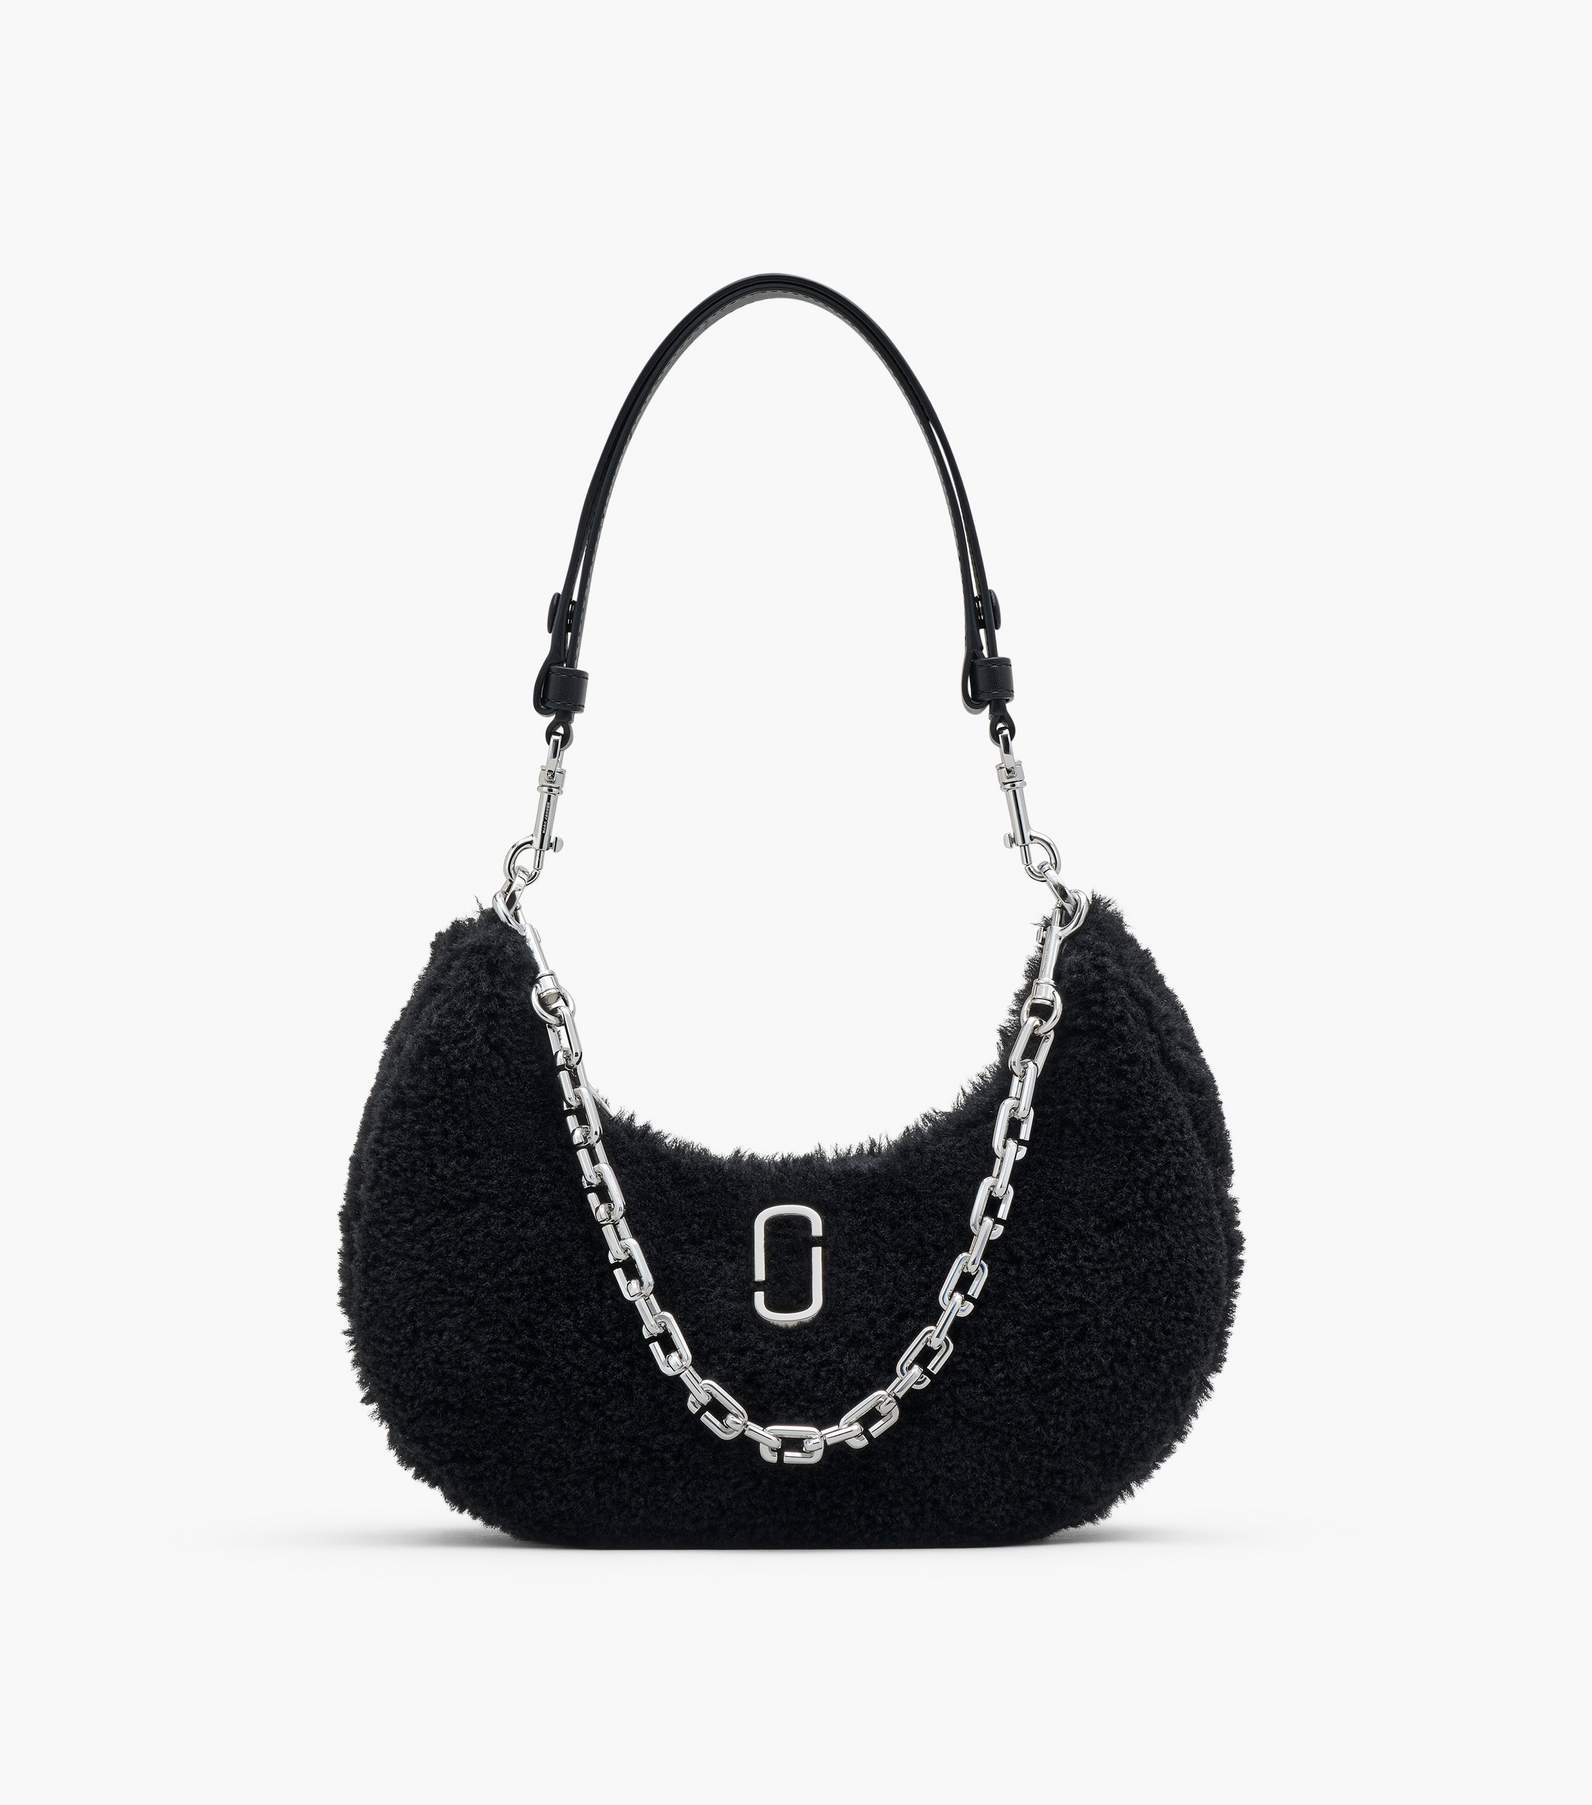 Marc Jacobs Black Small 'The Curve' Bag